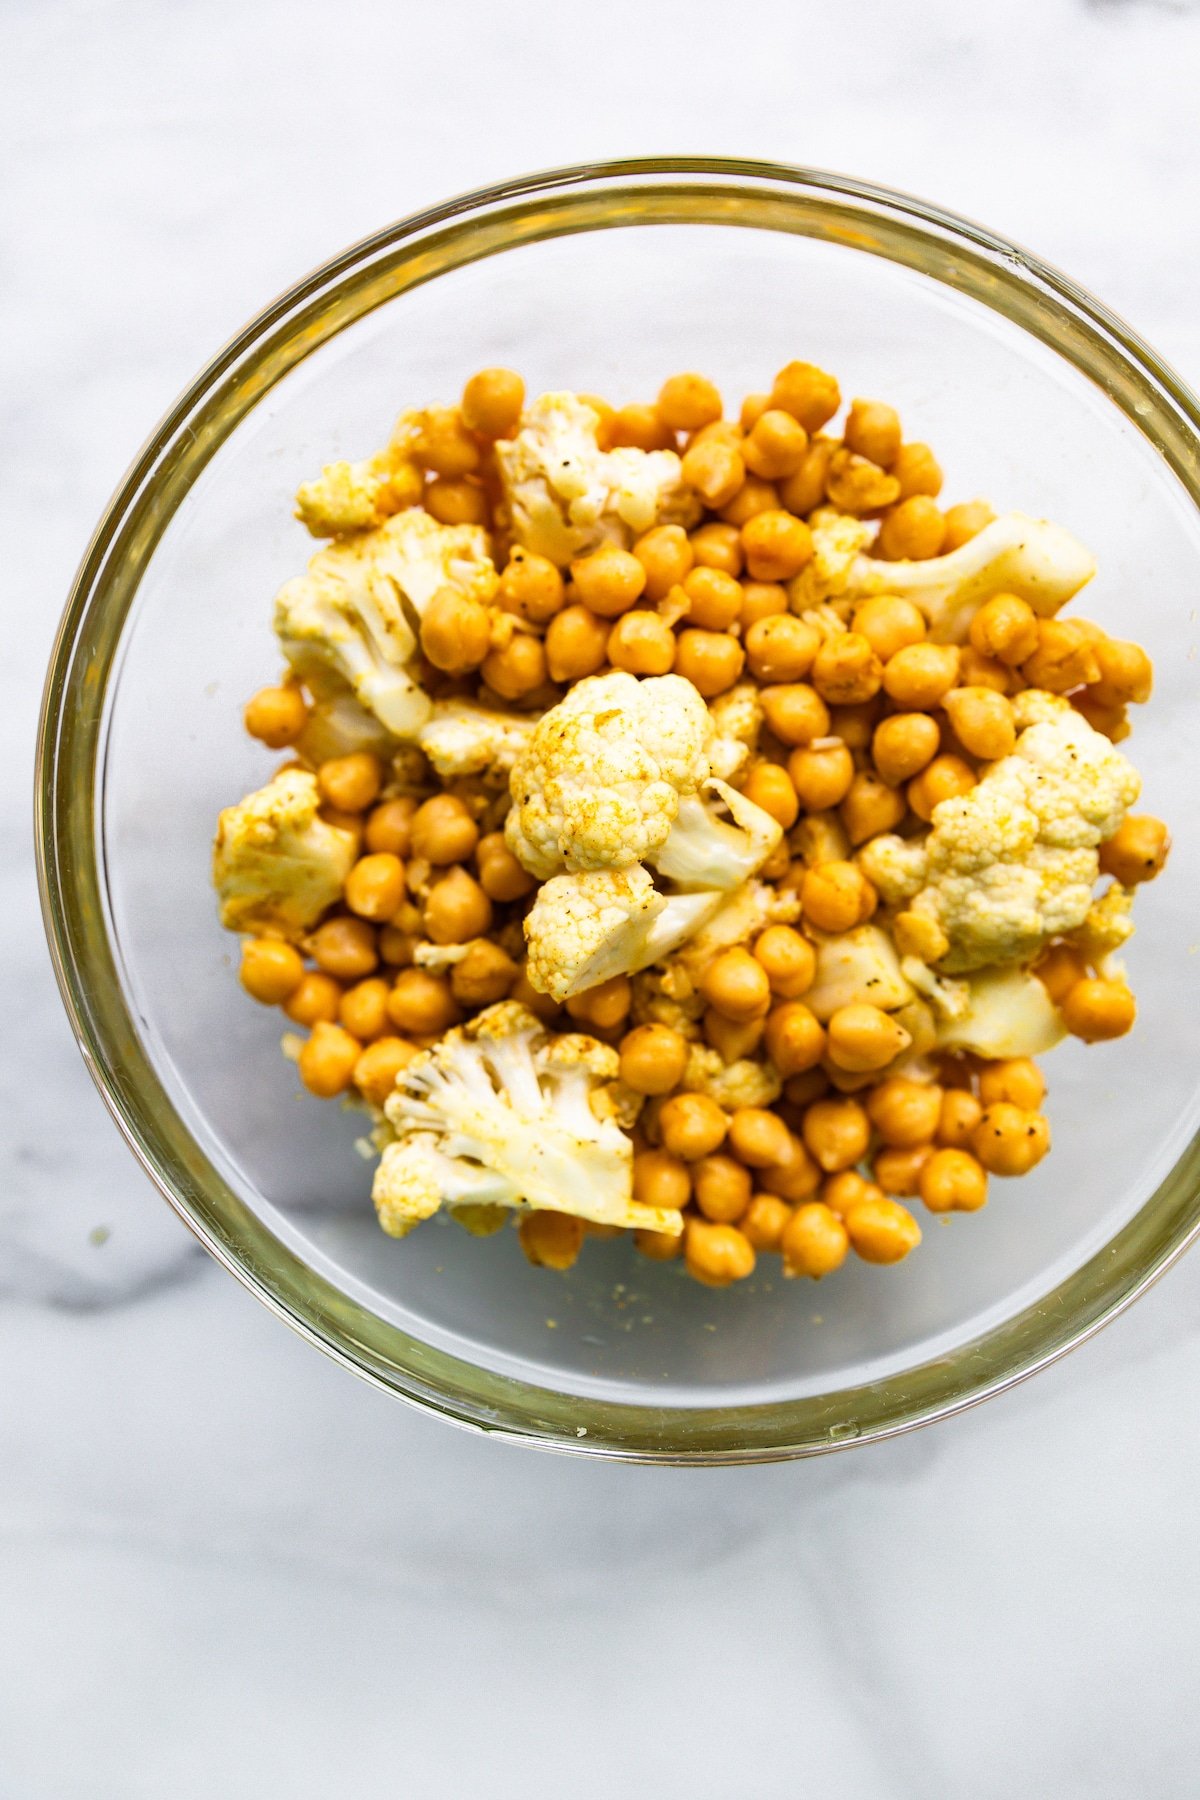 Overhead photo of a clear glass bowl filled with curried cauliflower florets and chickpeas.